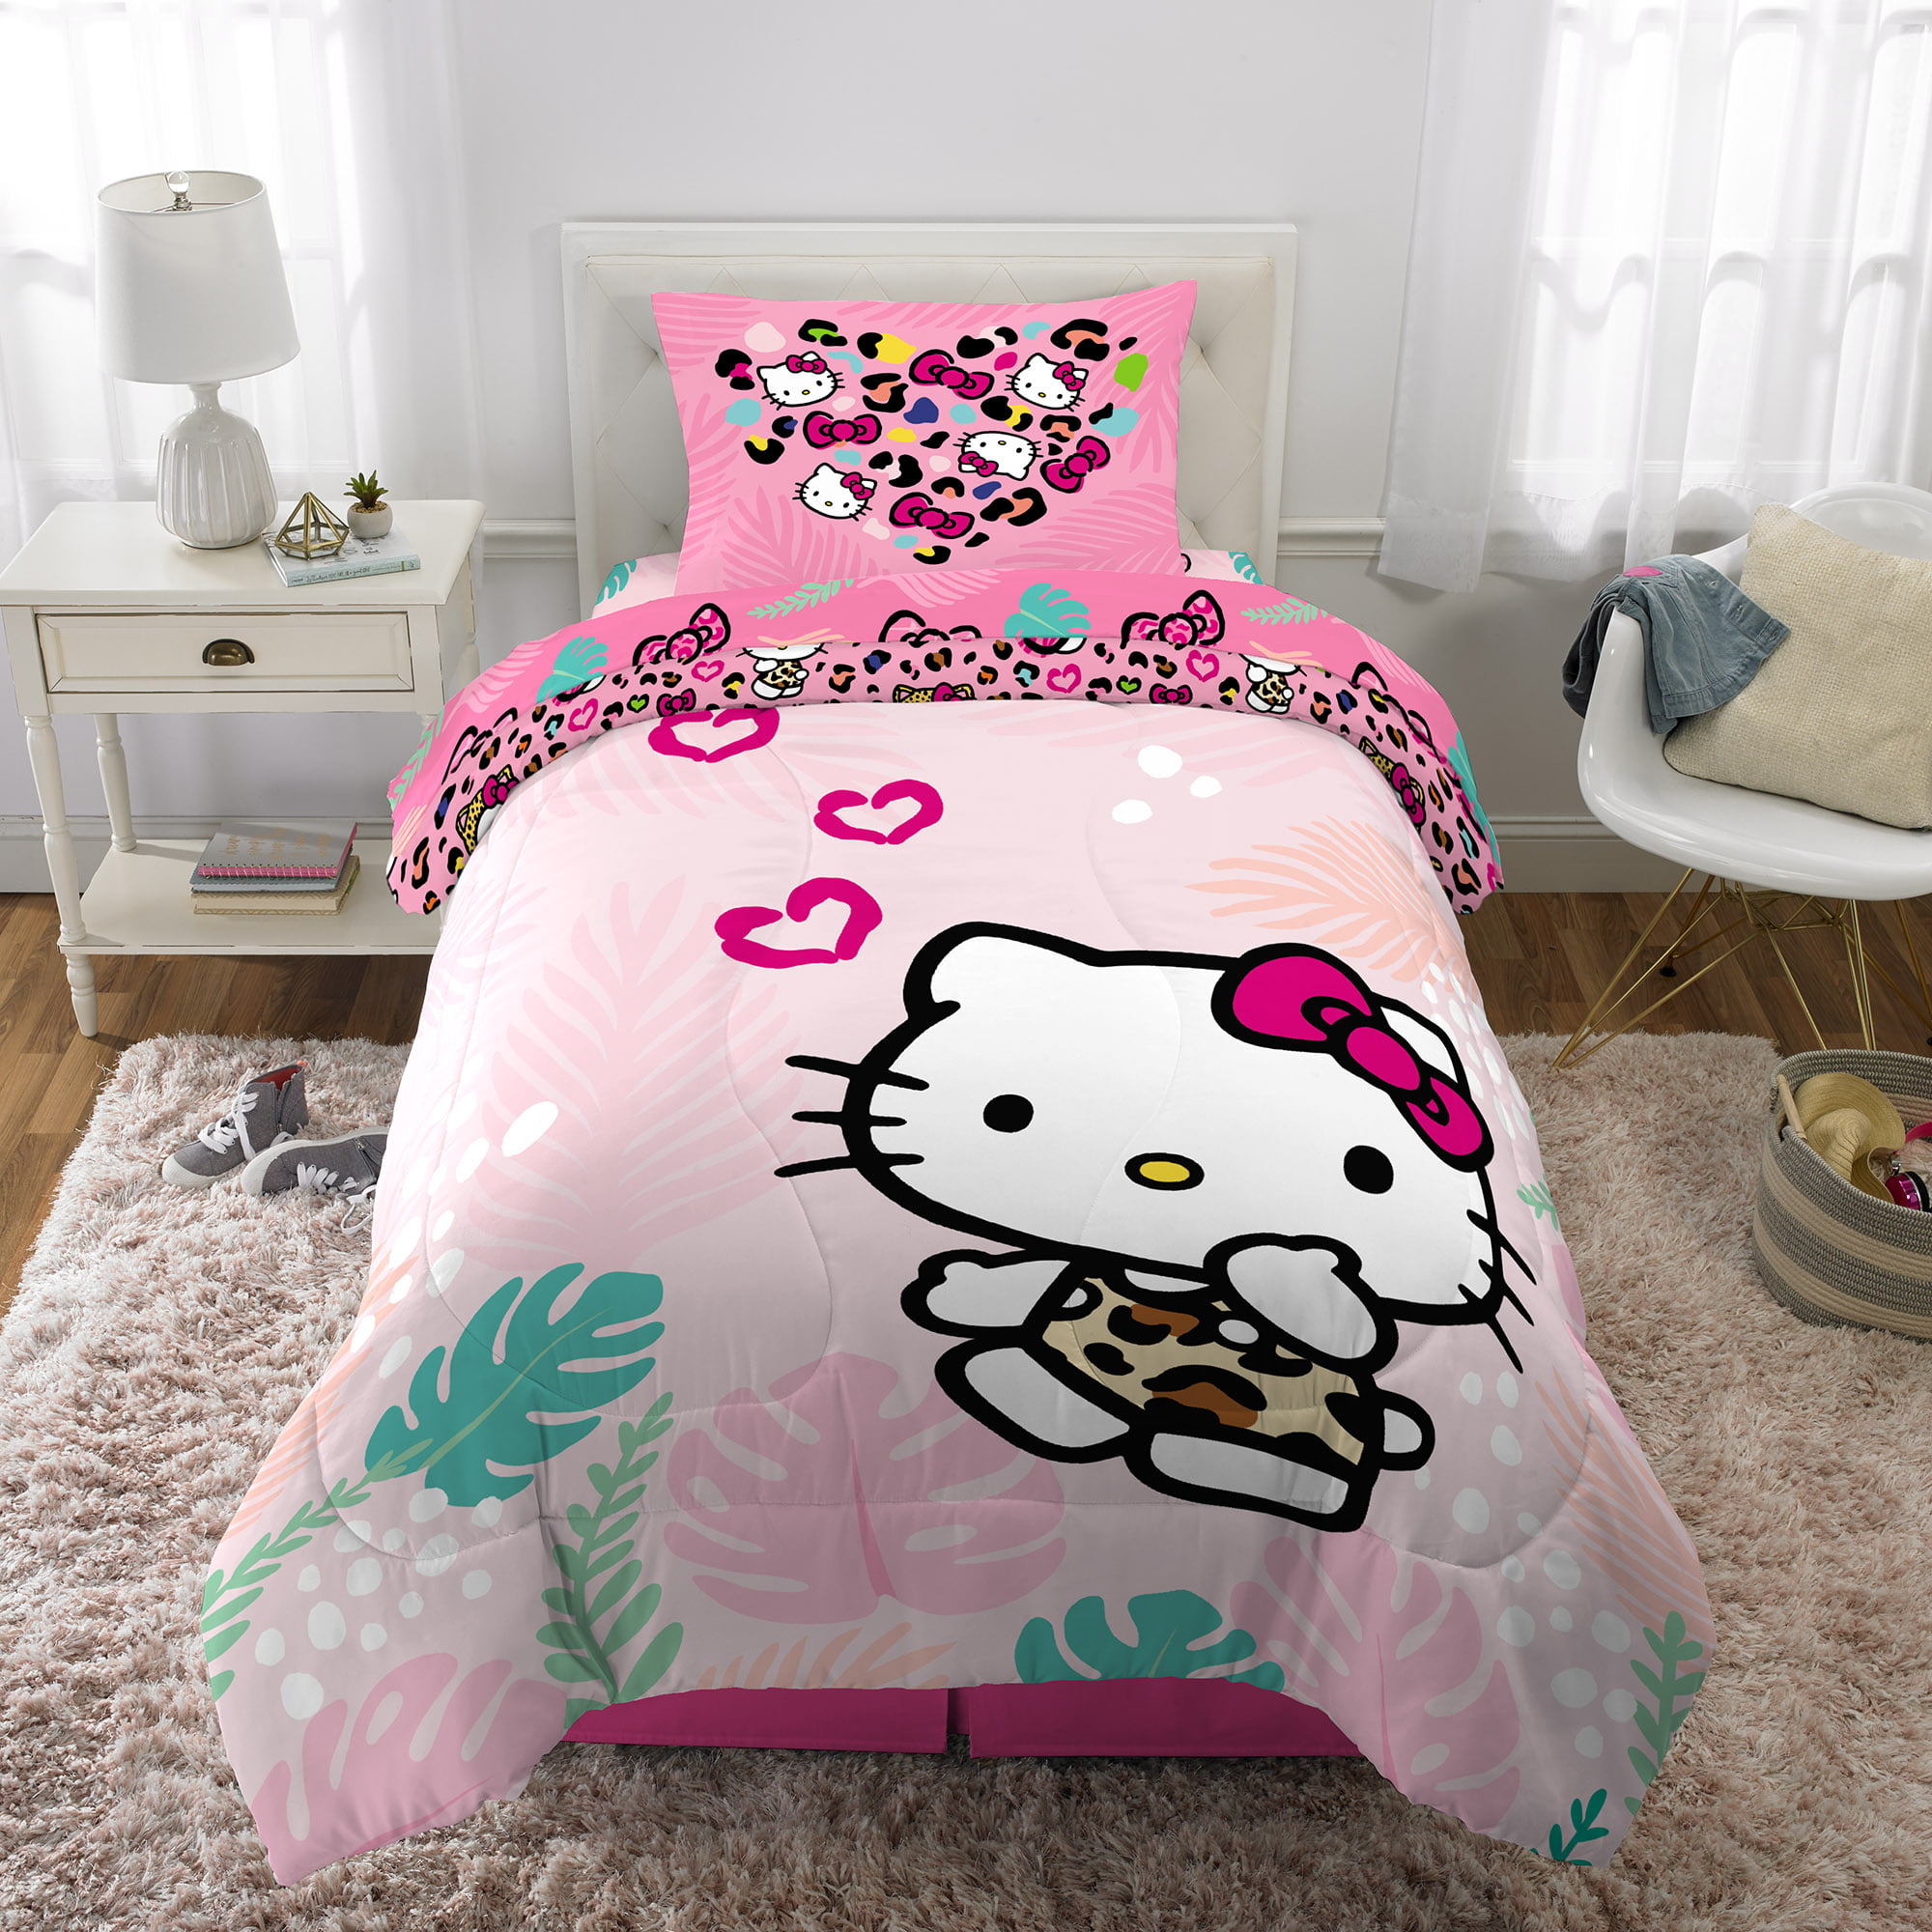 Bedding Collections Home & Kitchen Bedding & Linen Hello Kitty Childrens  Girls Kiss Reversible Twin Comforter Cover Bedding Set Twin Pink  christkindlmarket.com